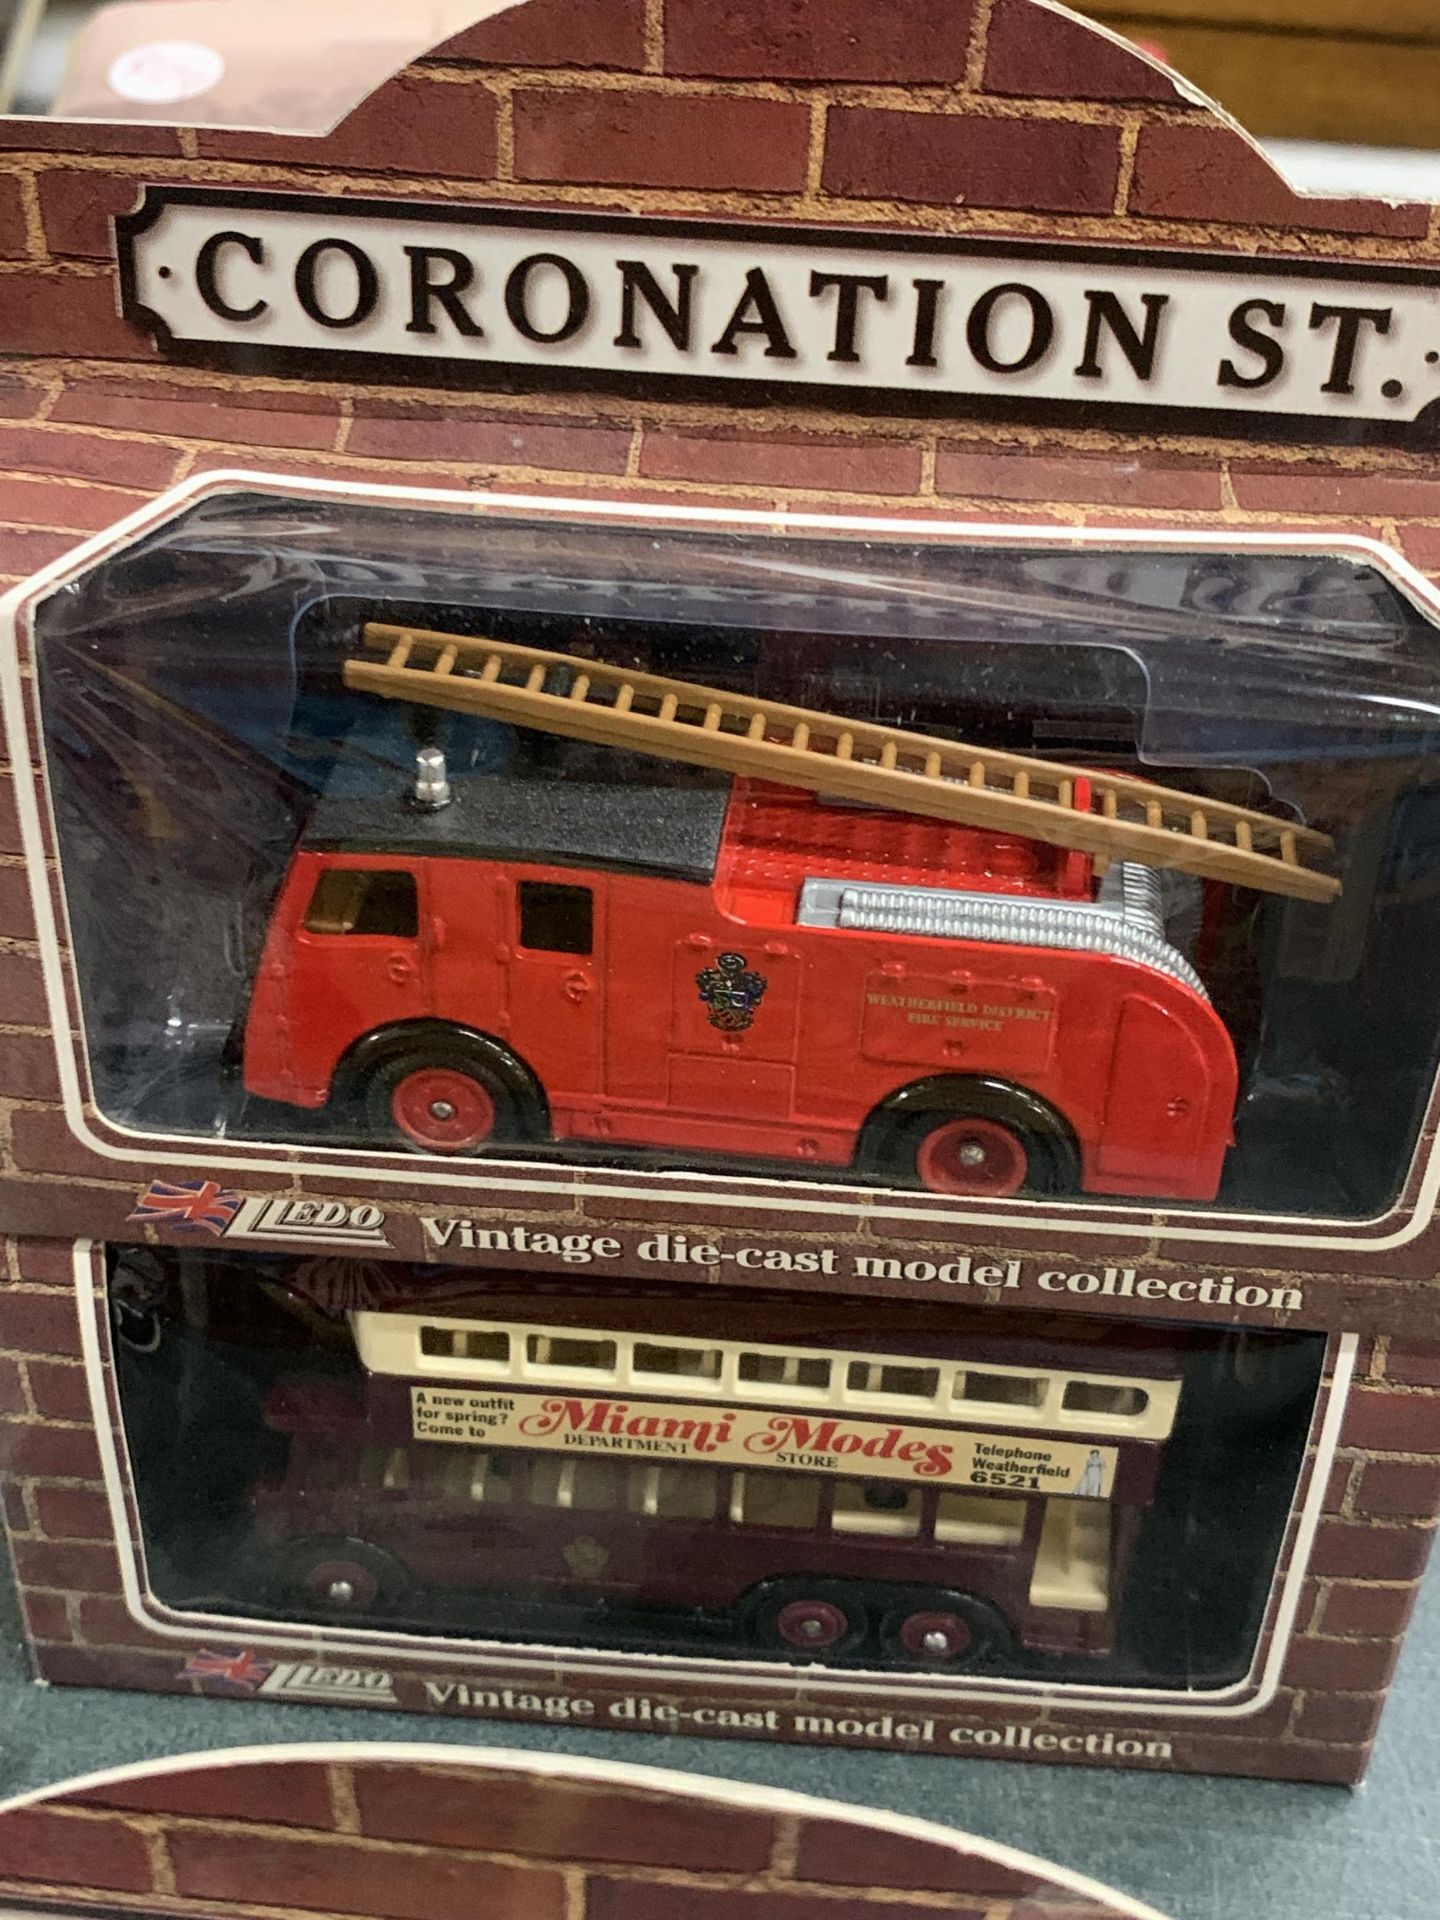 A COLLECTION OF 'CORONATION STREET' ITEMS TO INCLUDE SIX MODEL VEHICLES - BOXED, TWO BOOKS AND A MUG - Image 4 of 6